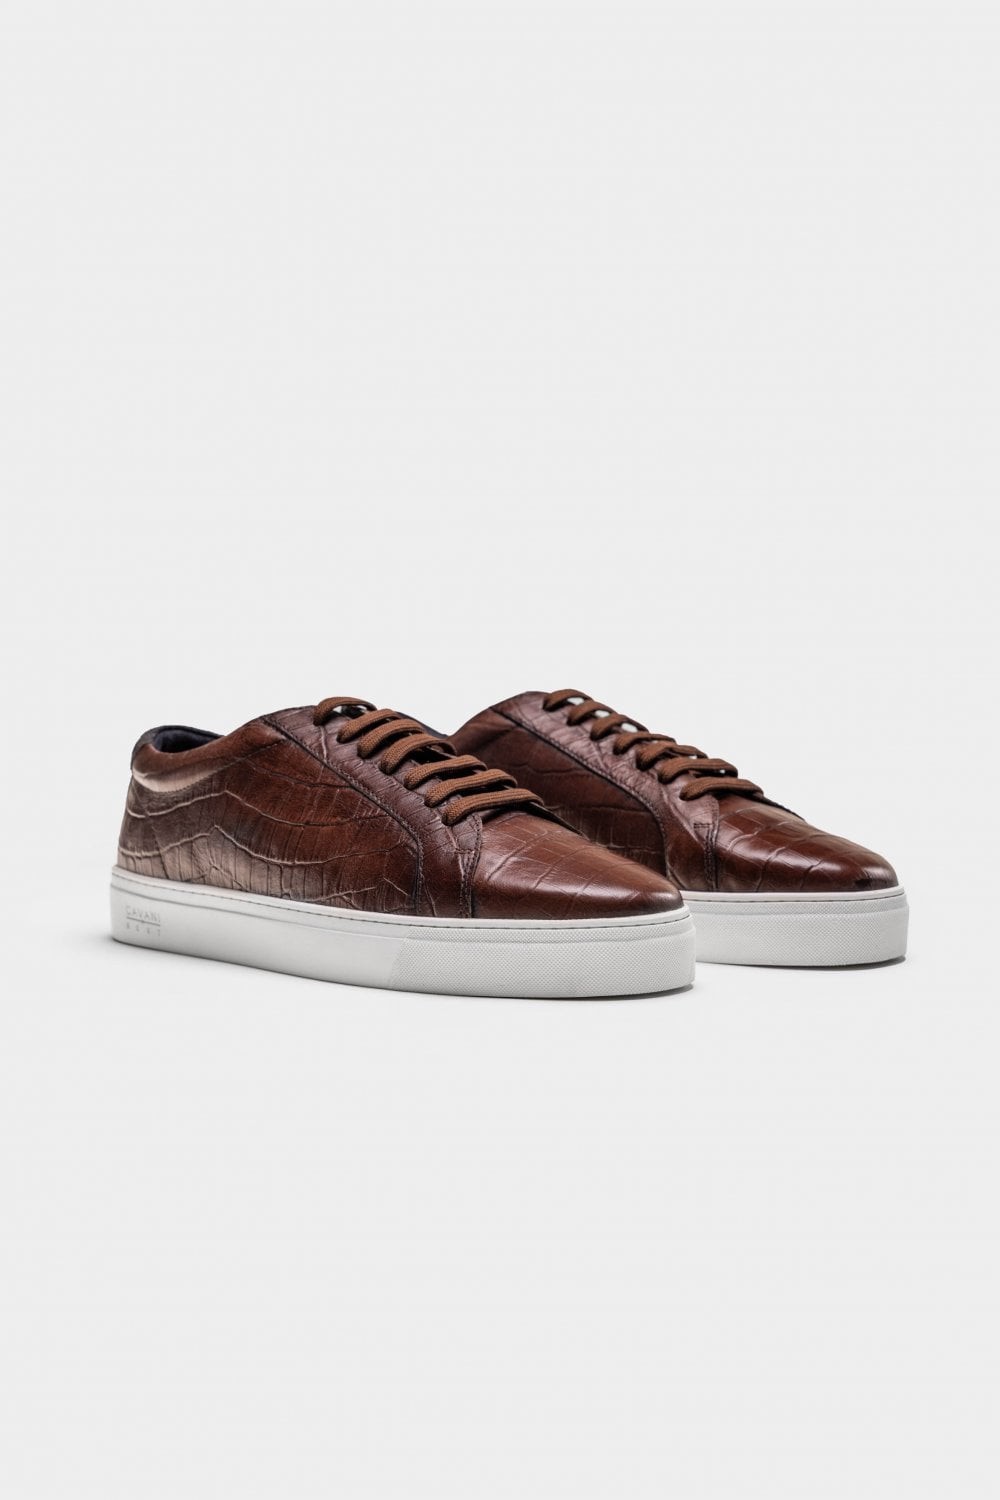 Men's Genuine Leather Crocodile Lace Up Sneakers - CROC - Brown